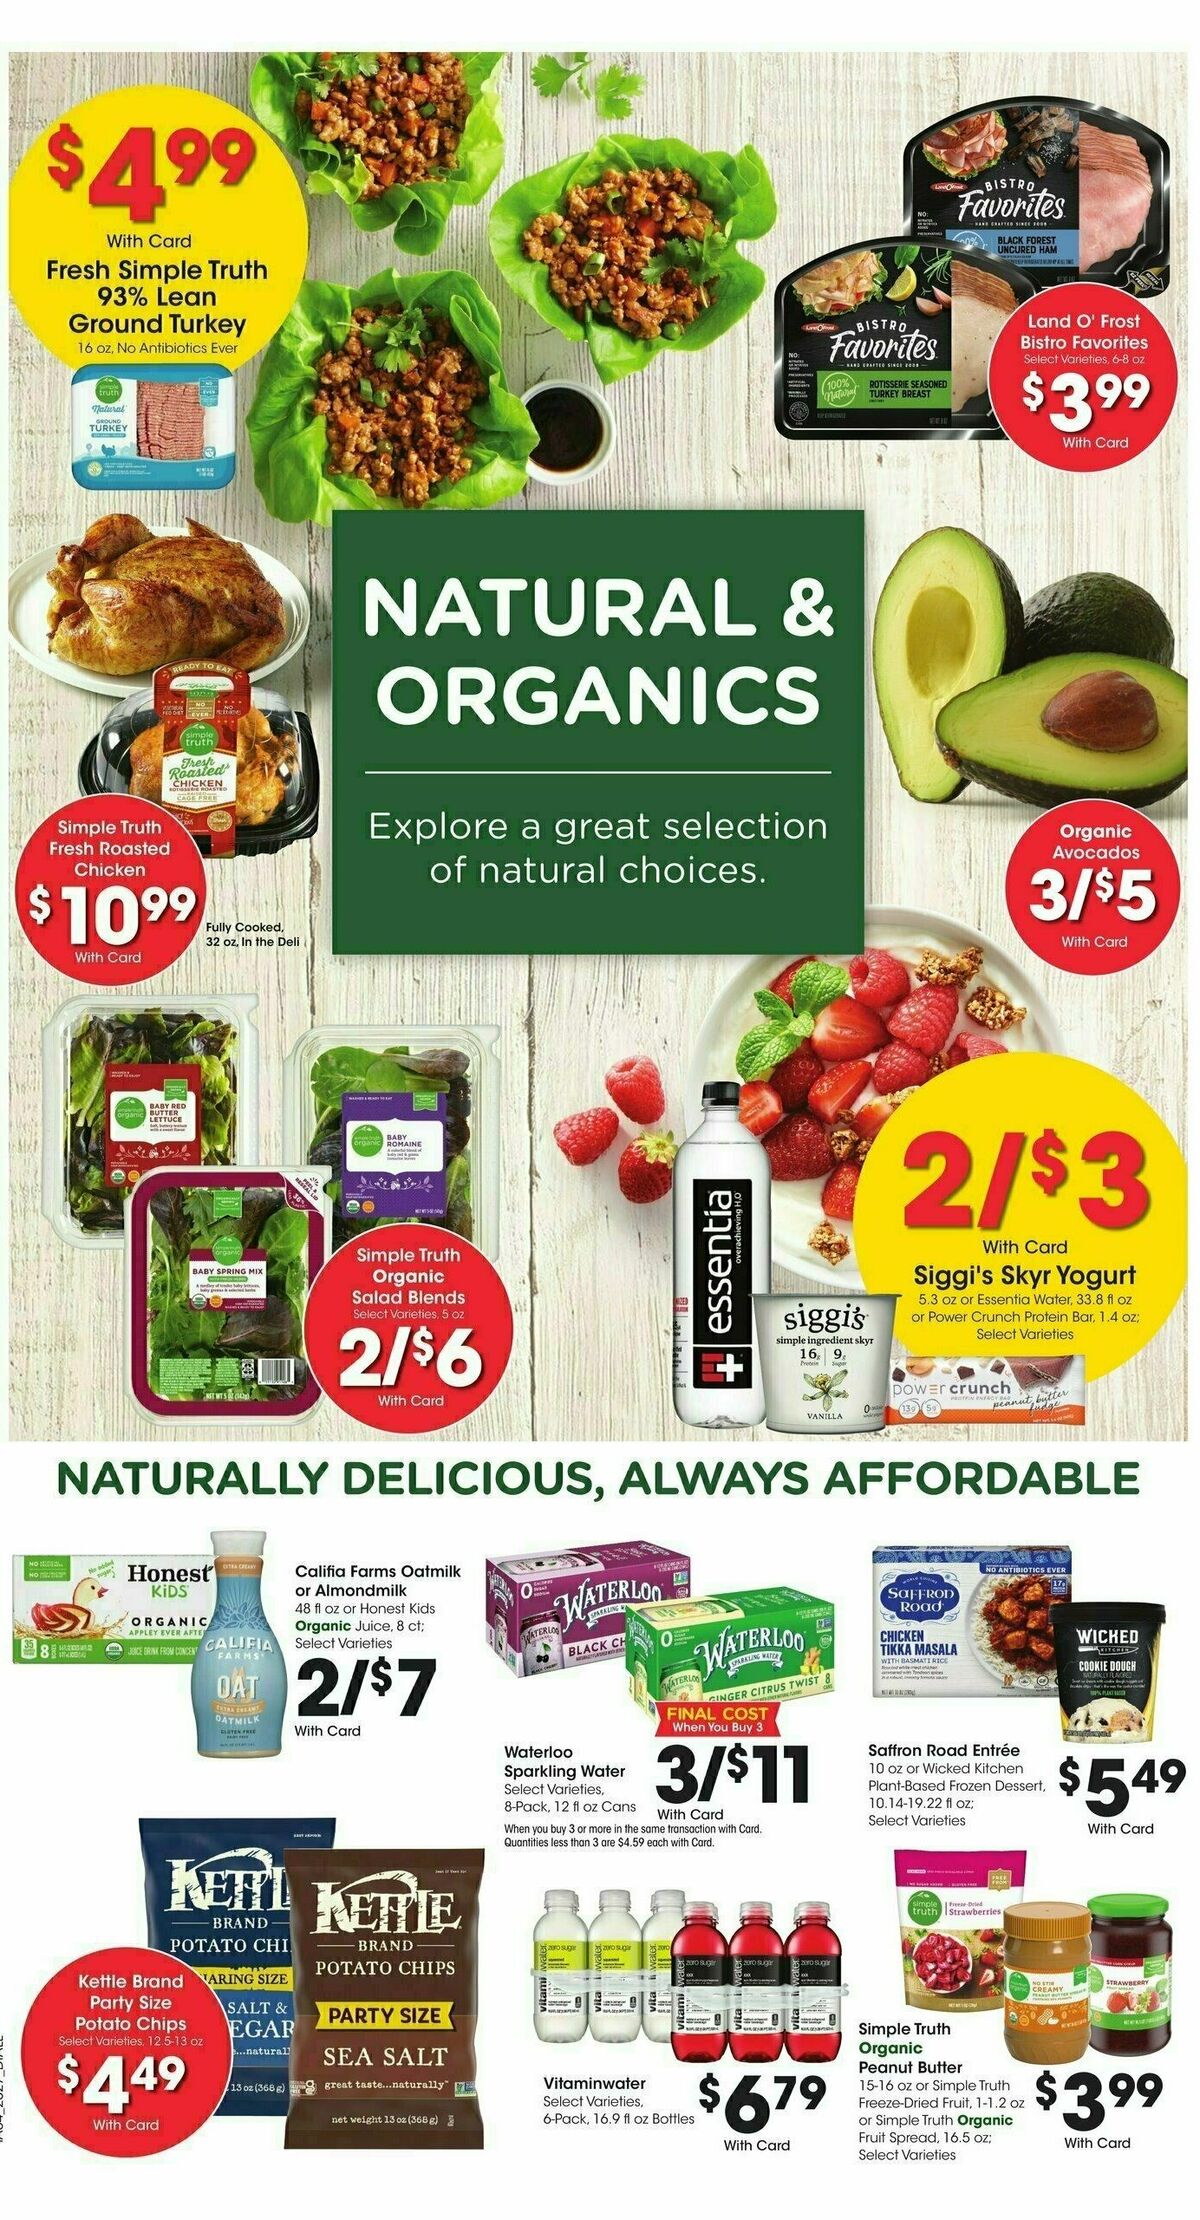 Baker's Weekly Ad from August 2